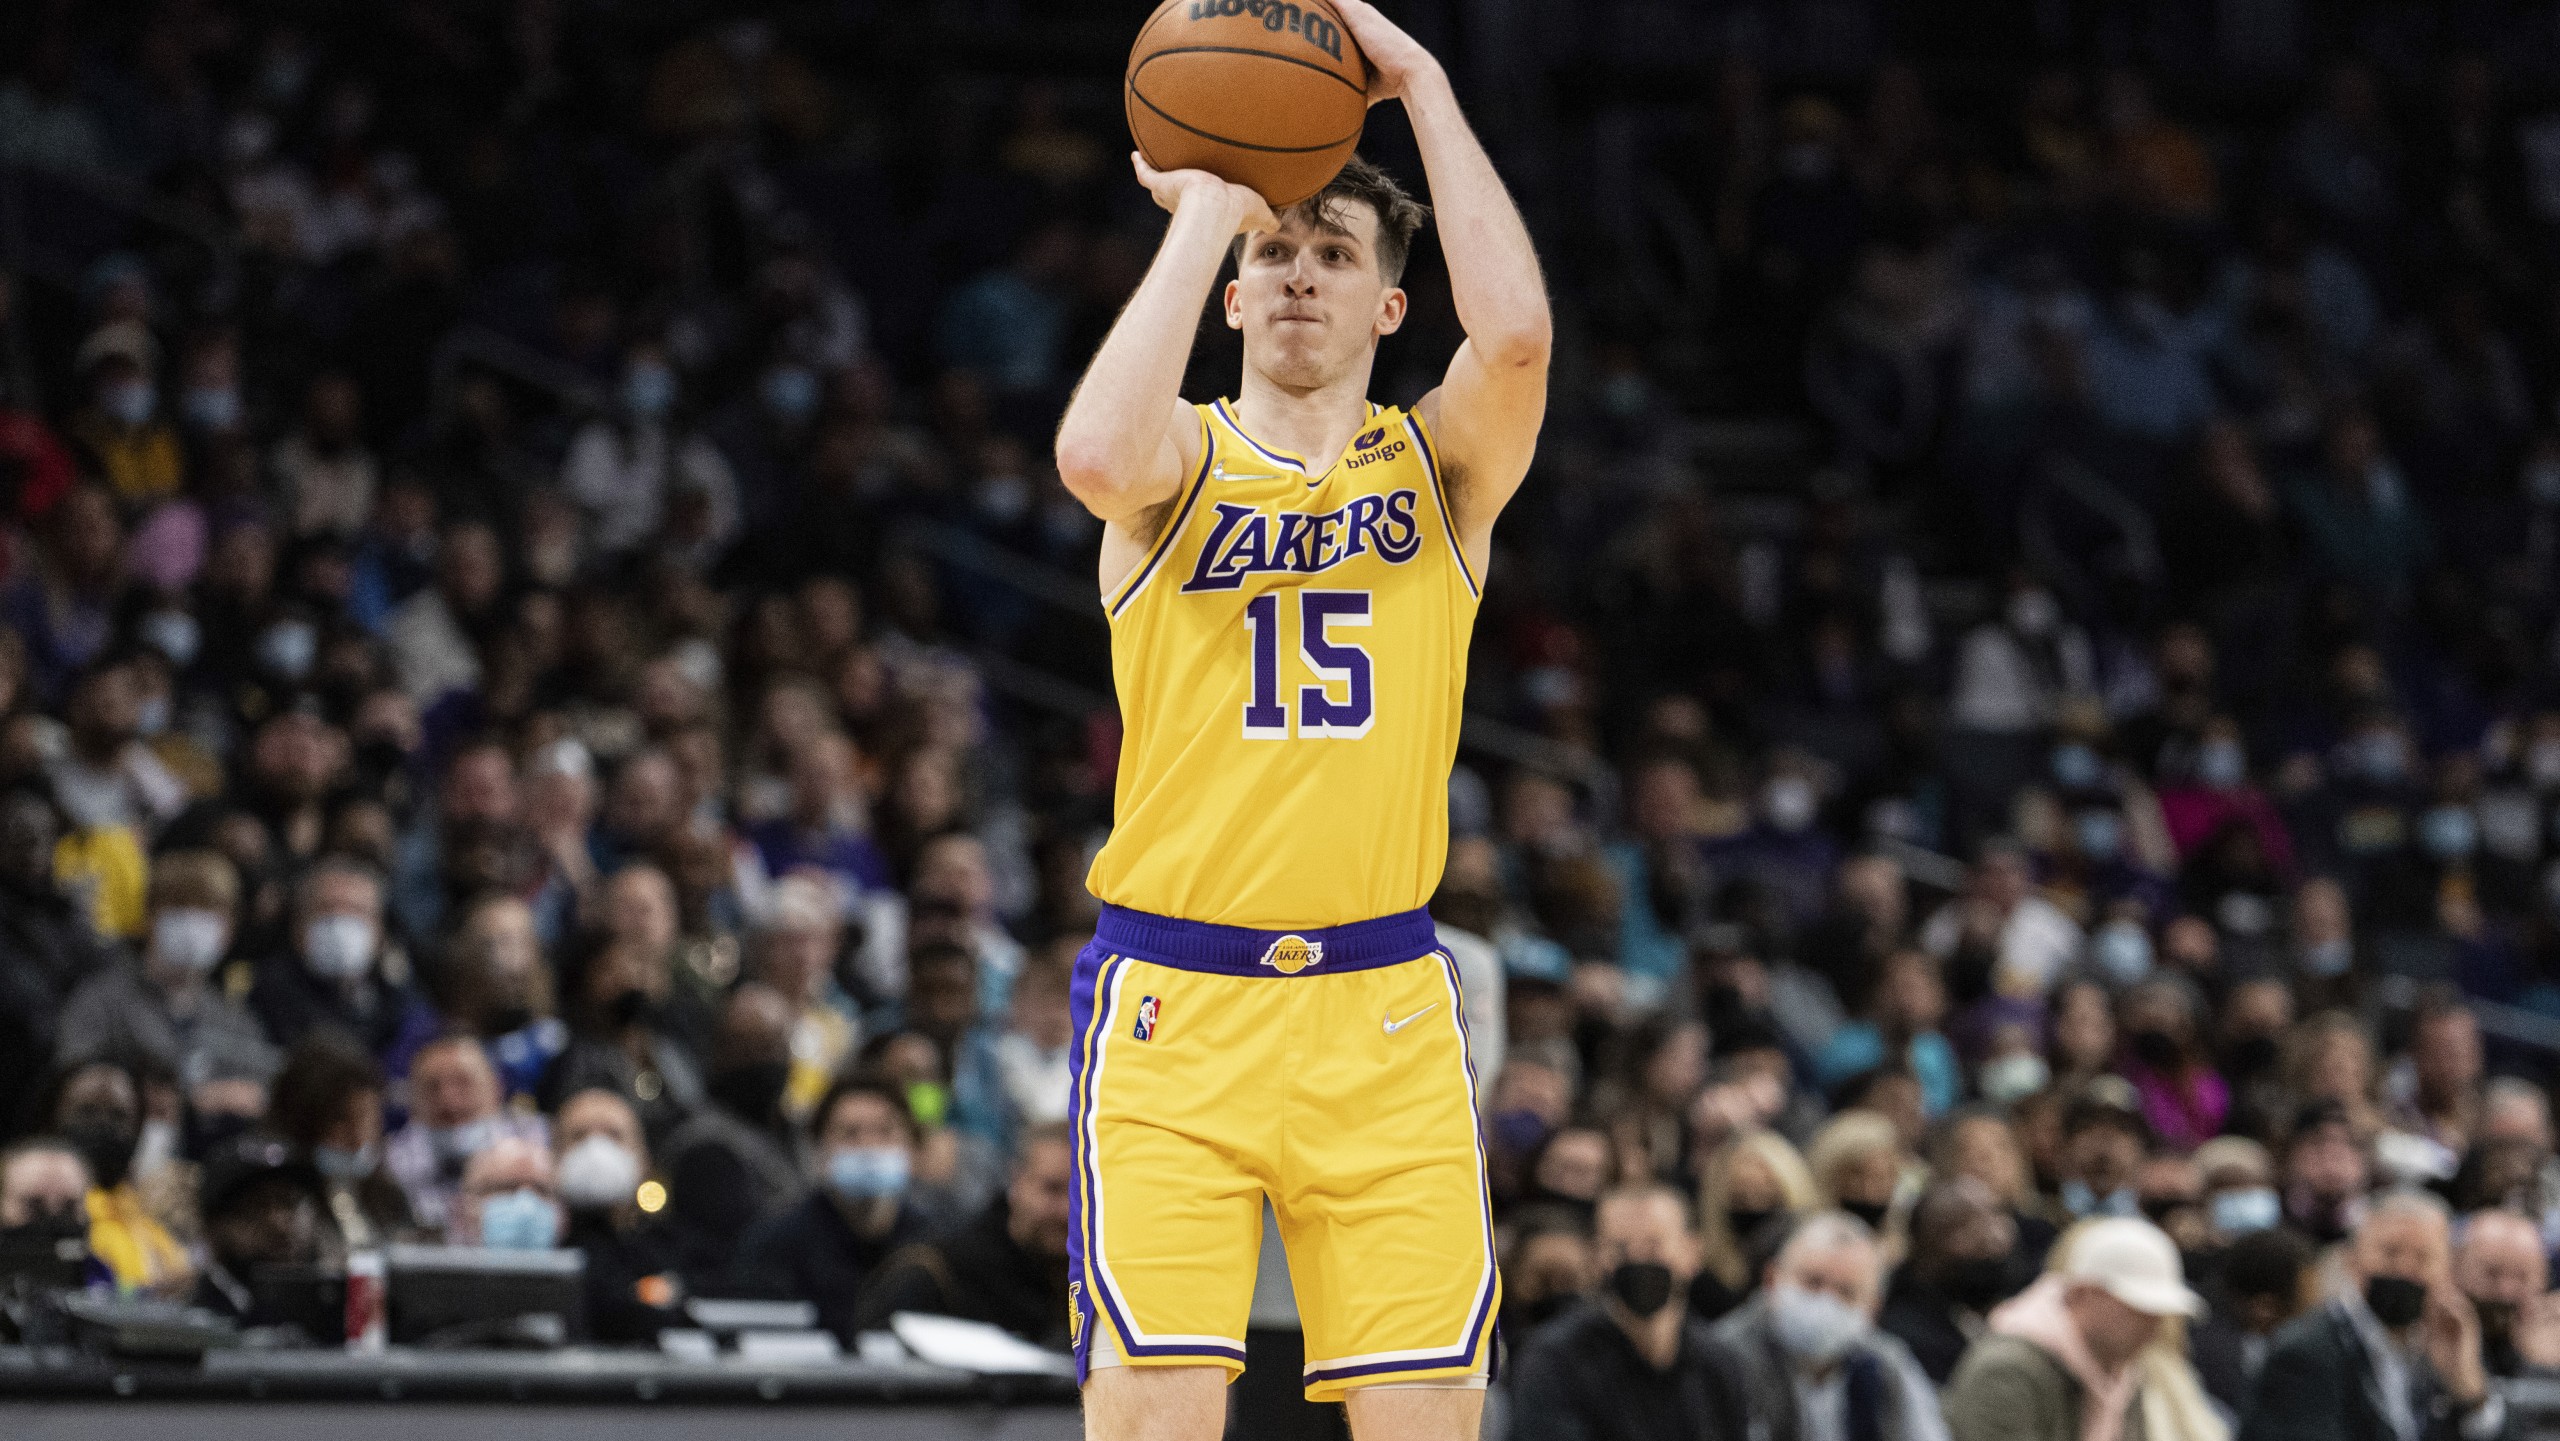 Los Angeles Lakers guard Austin Reaves (15) shoots the ball against the Charlotte Hornets during the second half of an NBA basketball game in Charlotte, N.C., Friday, Jan. 28, 2022. (AP Photo/Jacob Kupferman)